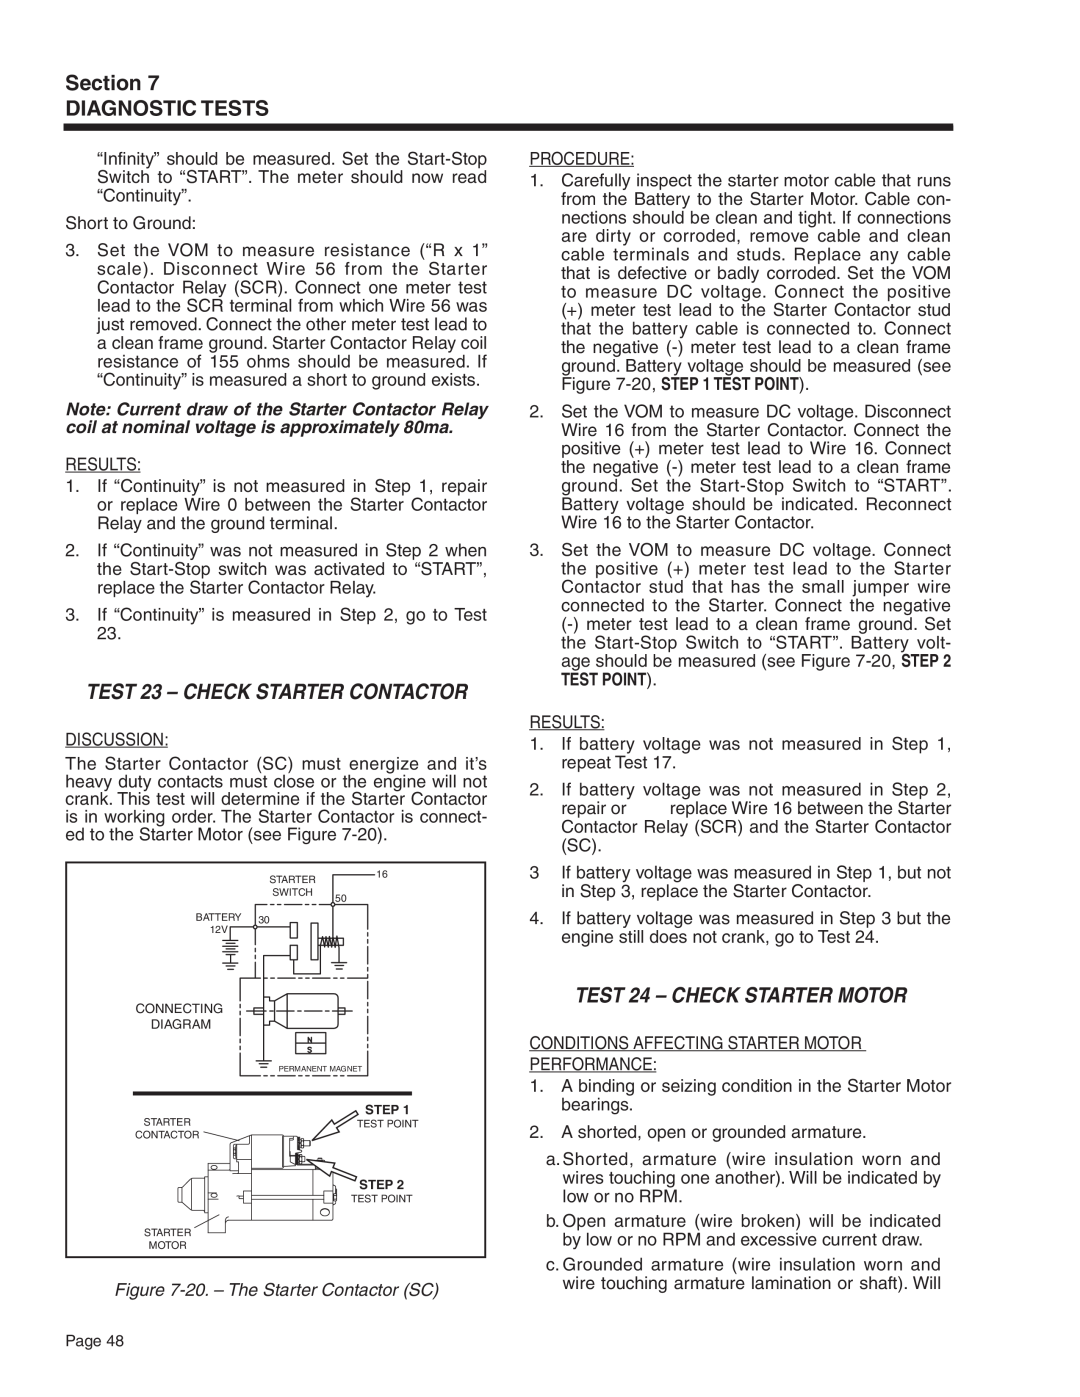 Generac Power Systems 5413 Test 23 - Check Starter Contactor, Test 24 - Check Starter Motor, Section DIAGNOSTIC TESTS 